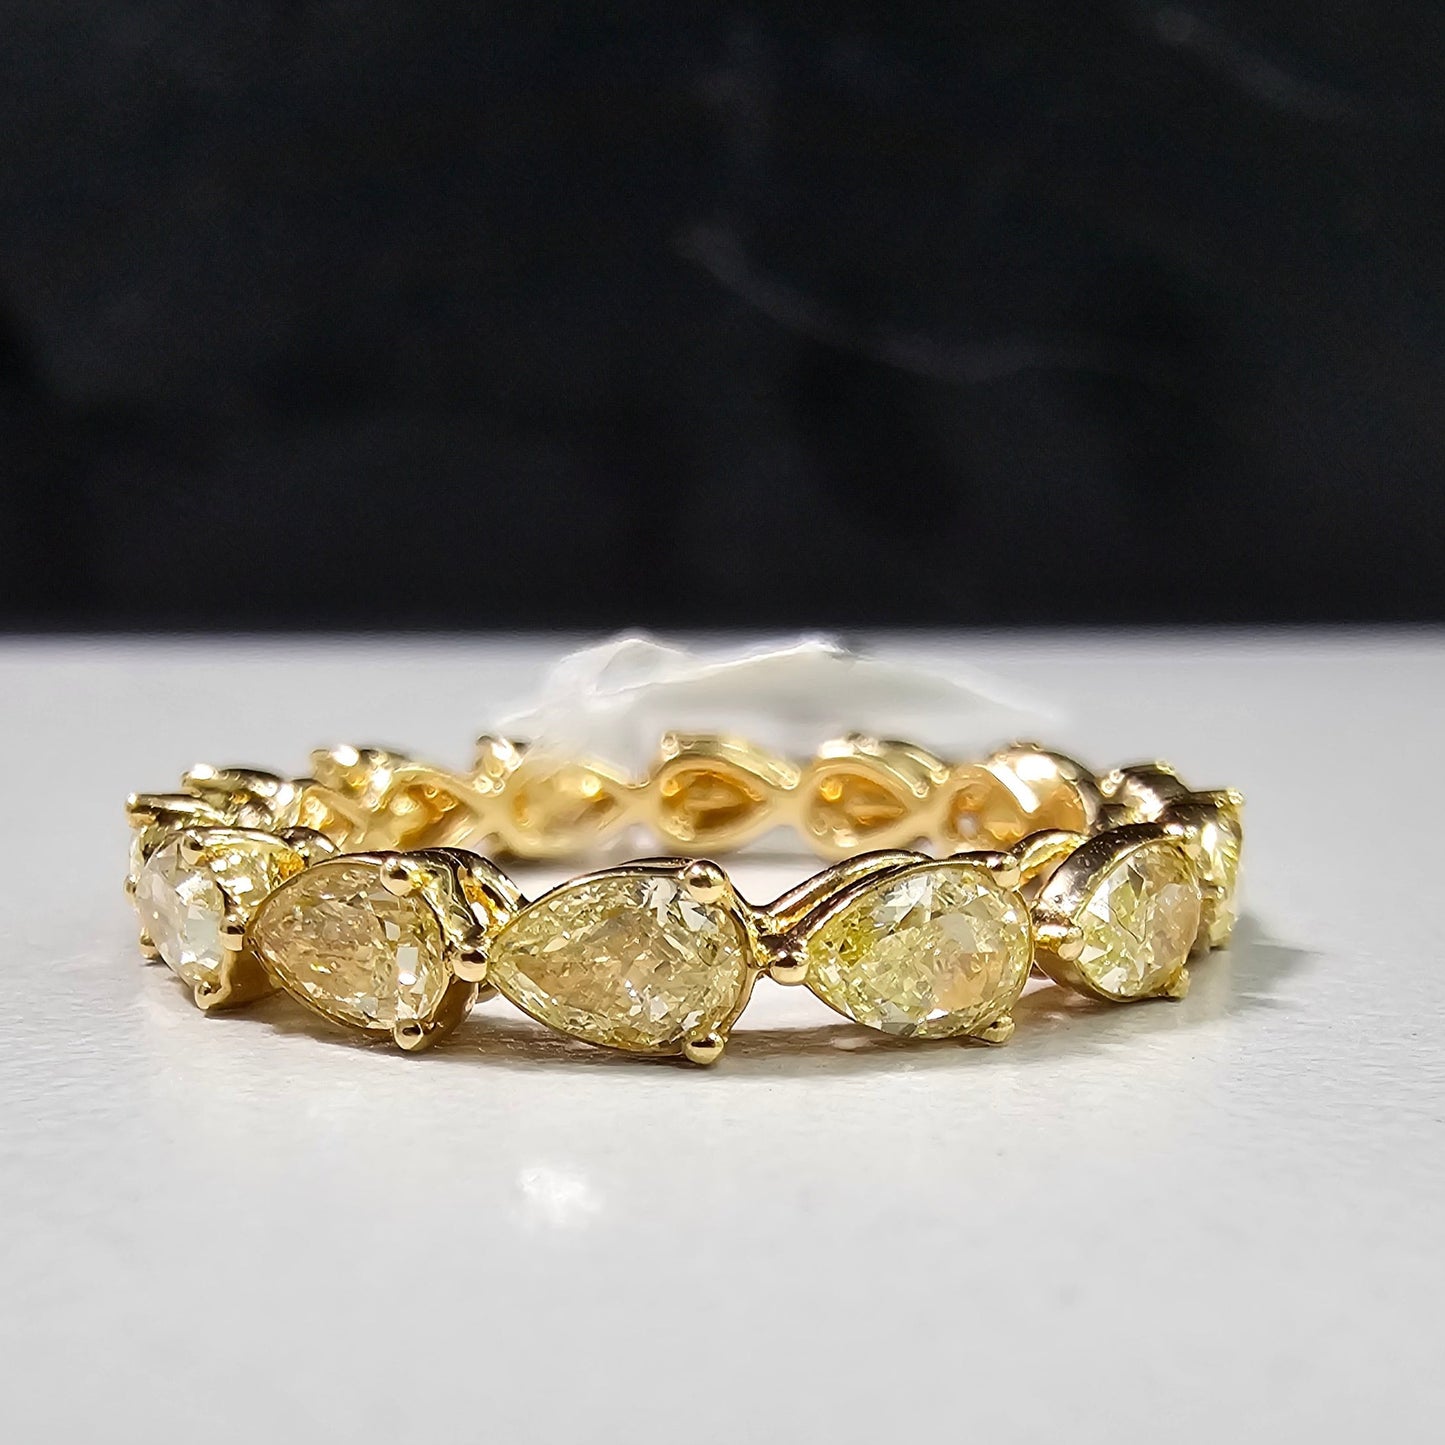 2.19 Carats Total 14 Pear Shape Diamonds Fancy Intense Yellow Diamonds Crafted in 18k Yellow Gold Handmade in NYC